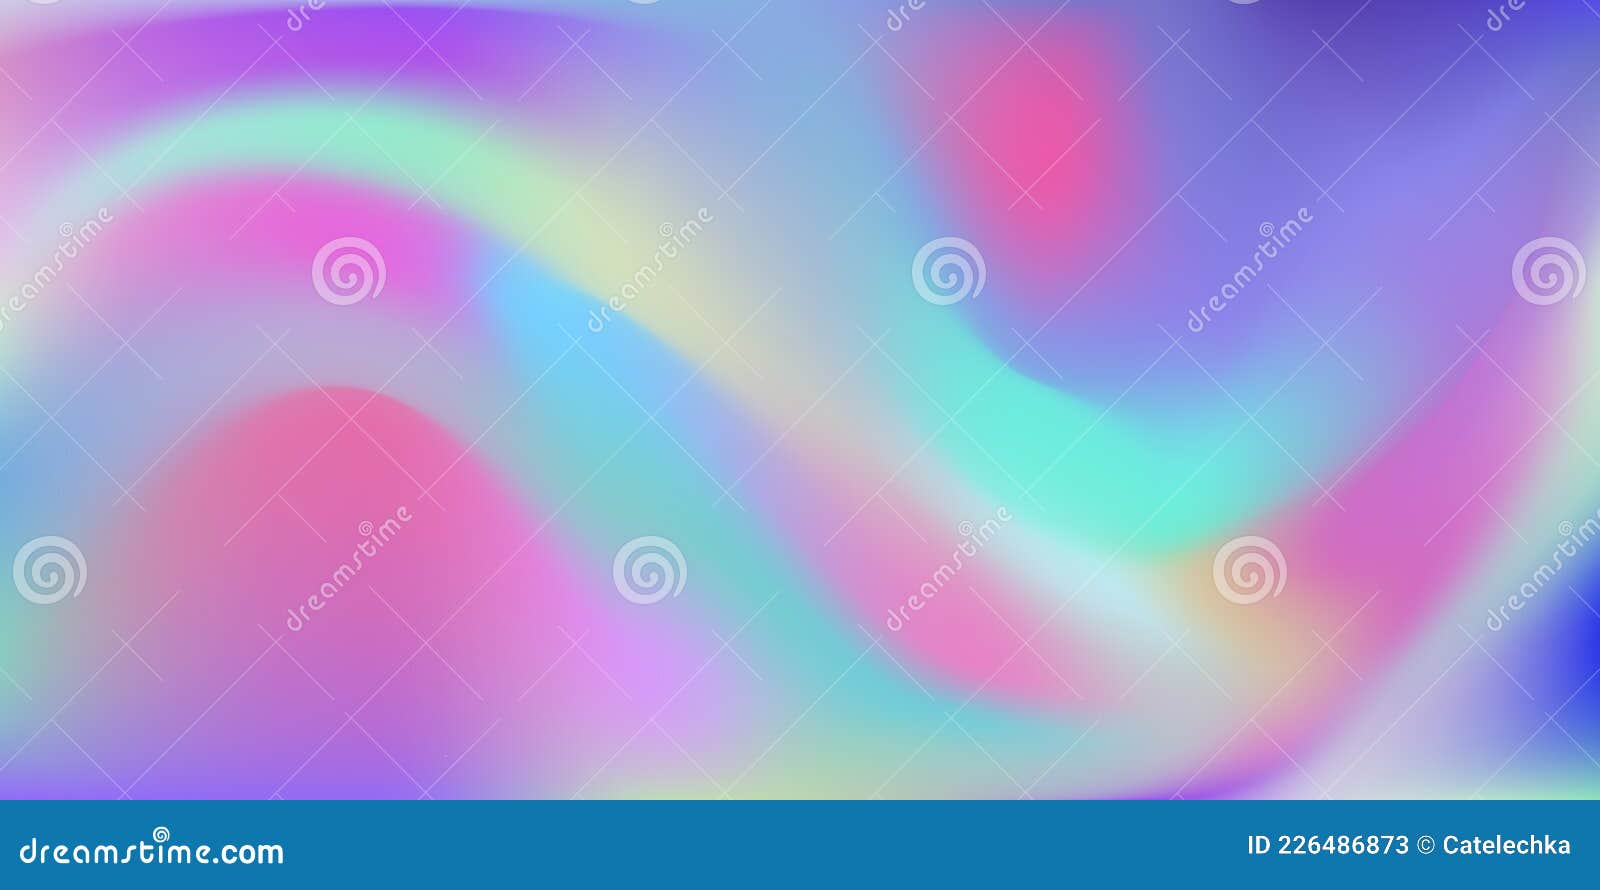 Holographic Foil. Abstract Wallpaper Background. Hologram Texture. Premium  Quality. Modern Vector Stock Vector - Illustration of liquid, bright:  226486873